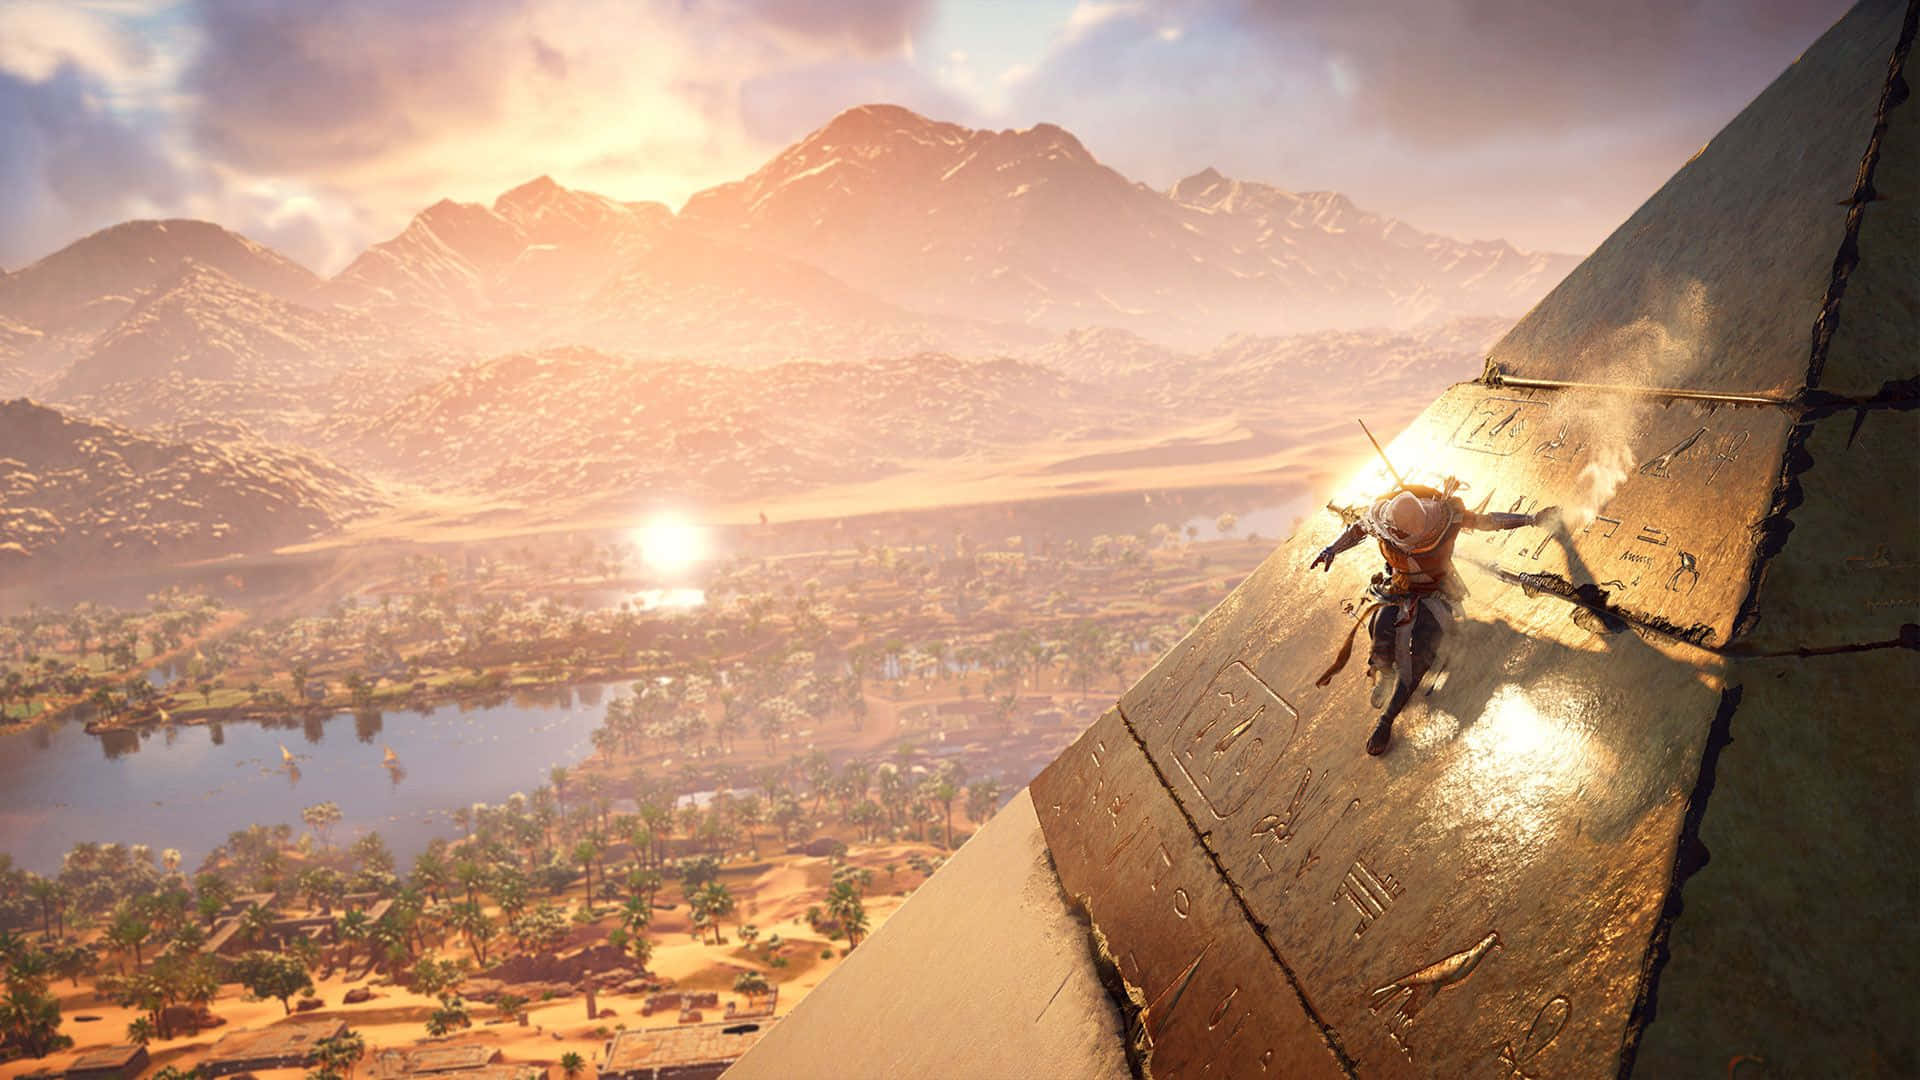 Great Pyramids 1920x1080 Assassin's Creed Origins Background